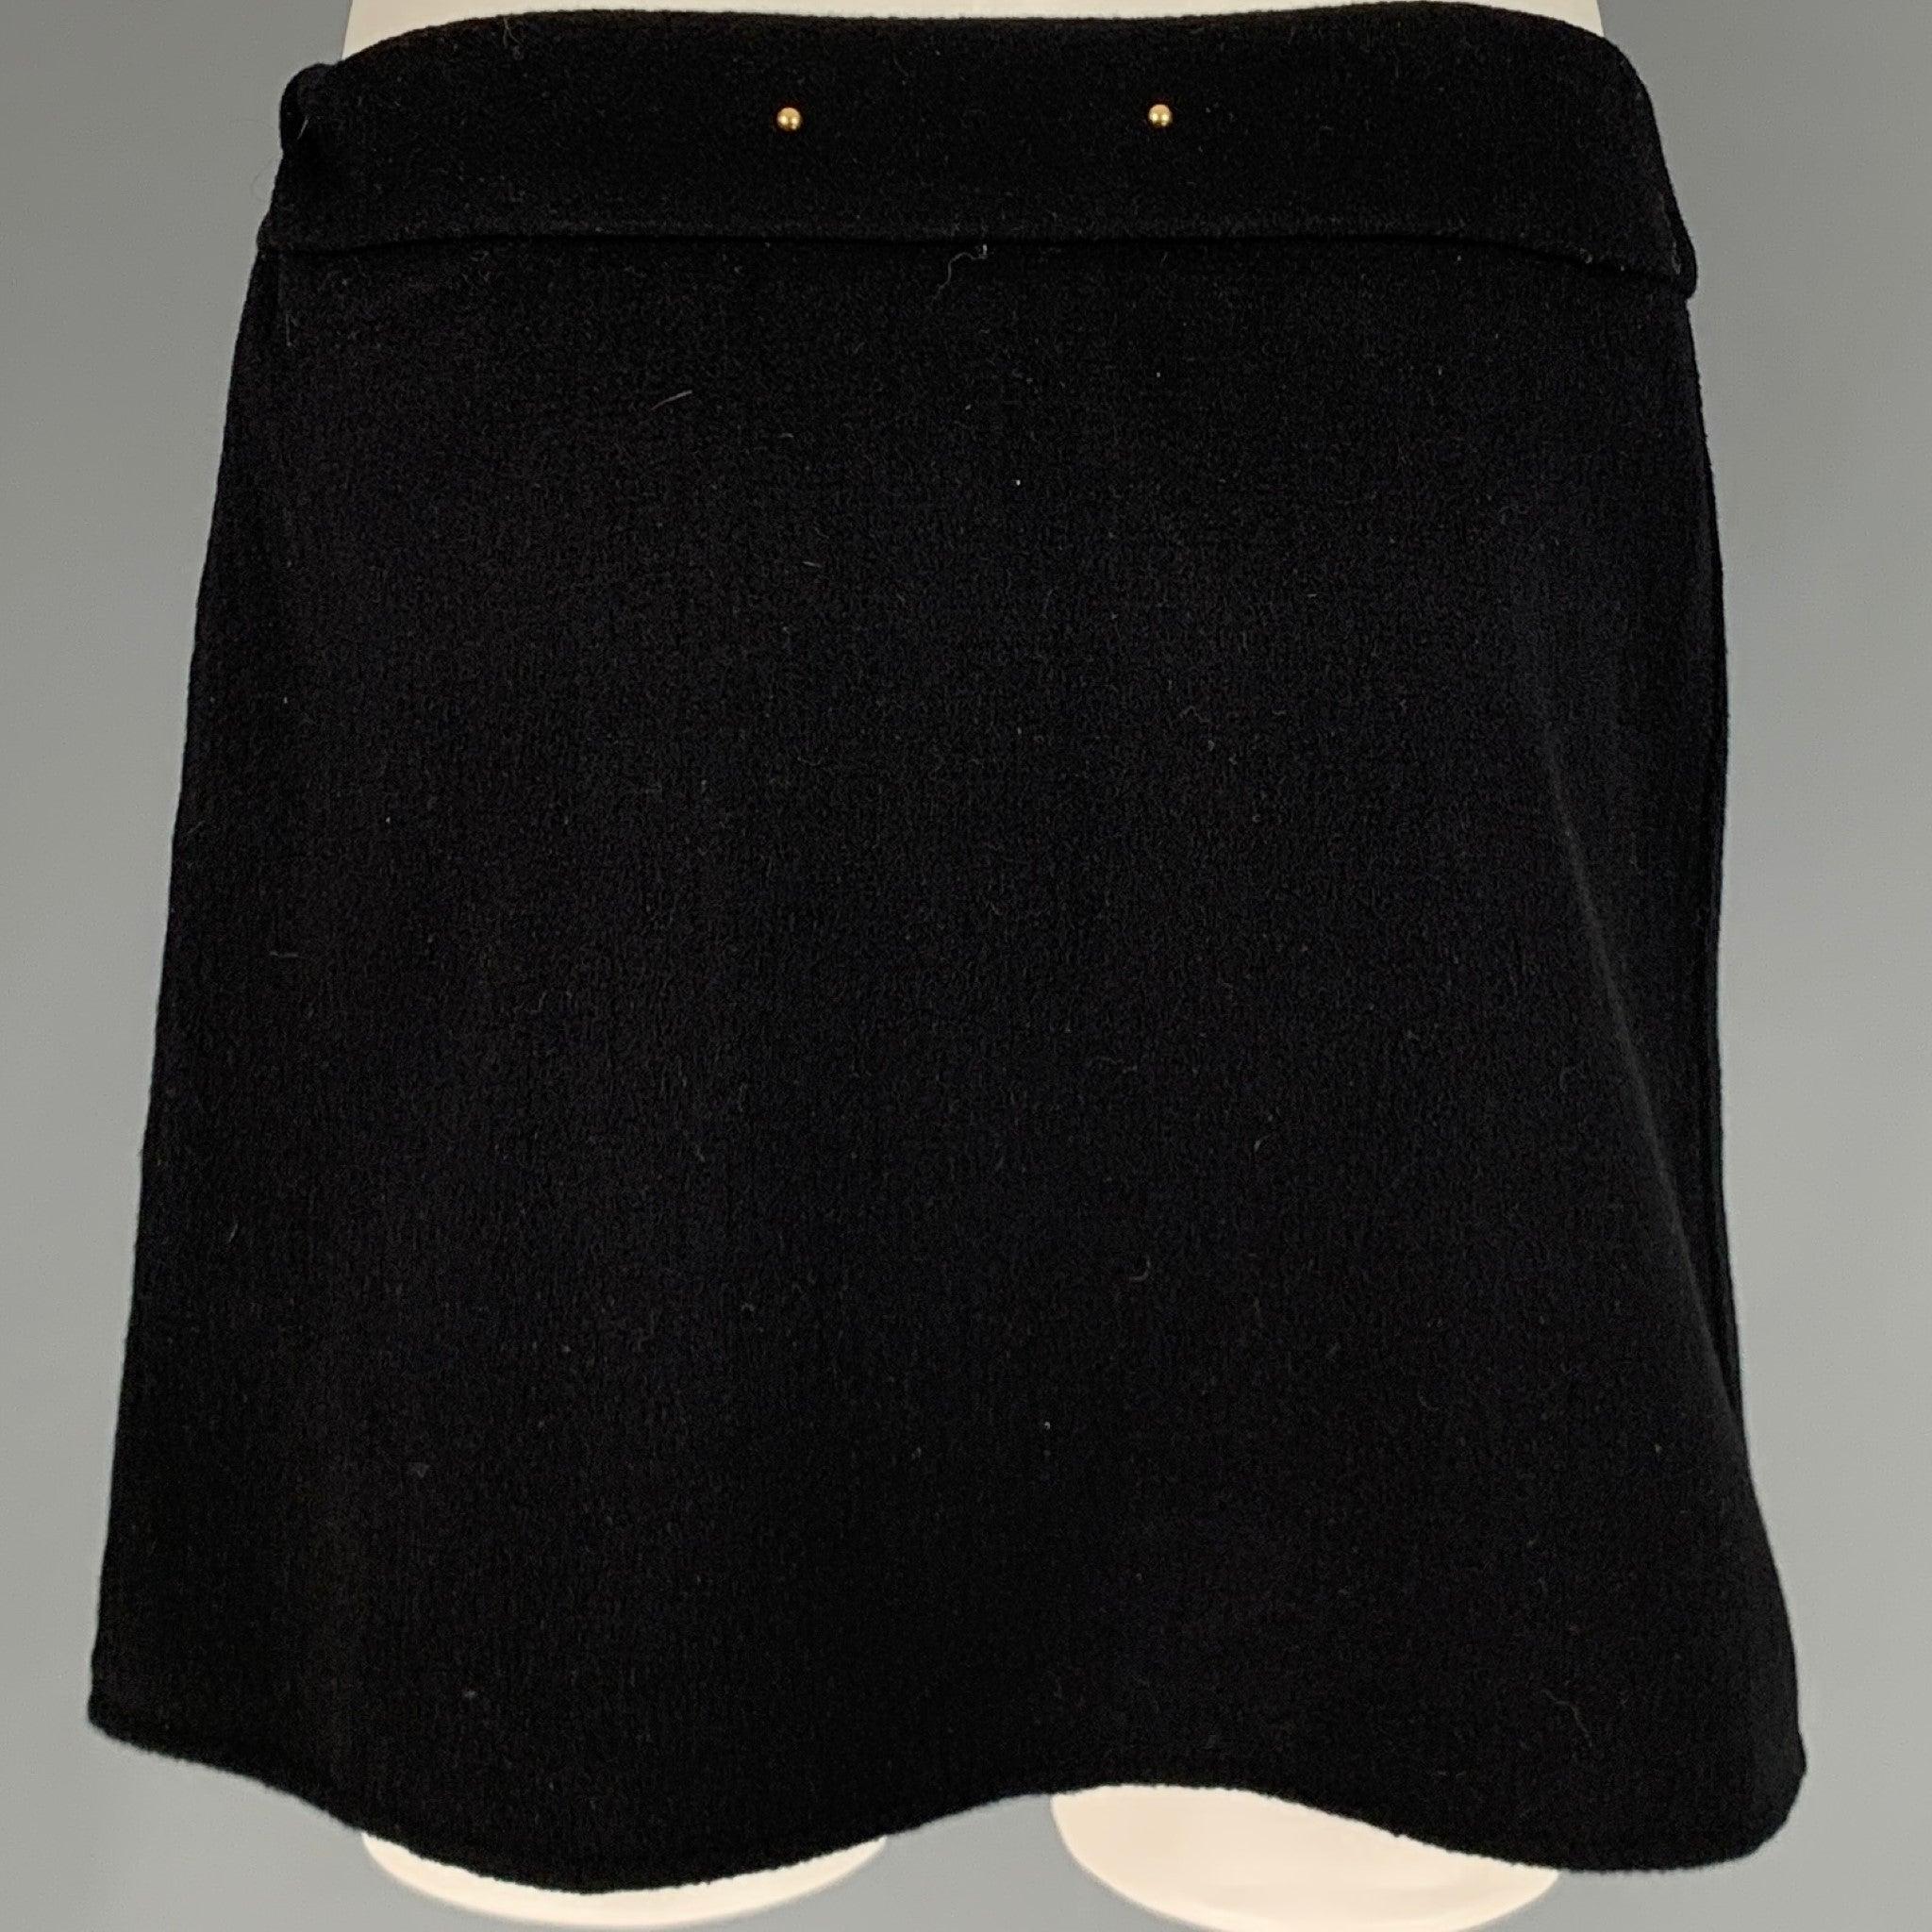 BARBARA BUI Size 8 Black Wool Cashmere Leather Zip Up Mini Skirt In Excellent Condition For Sale In San Francisco, CA